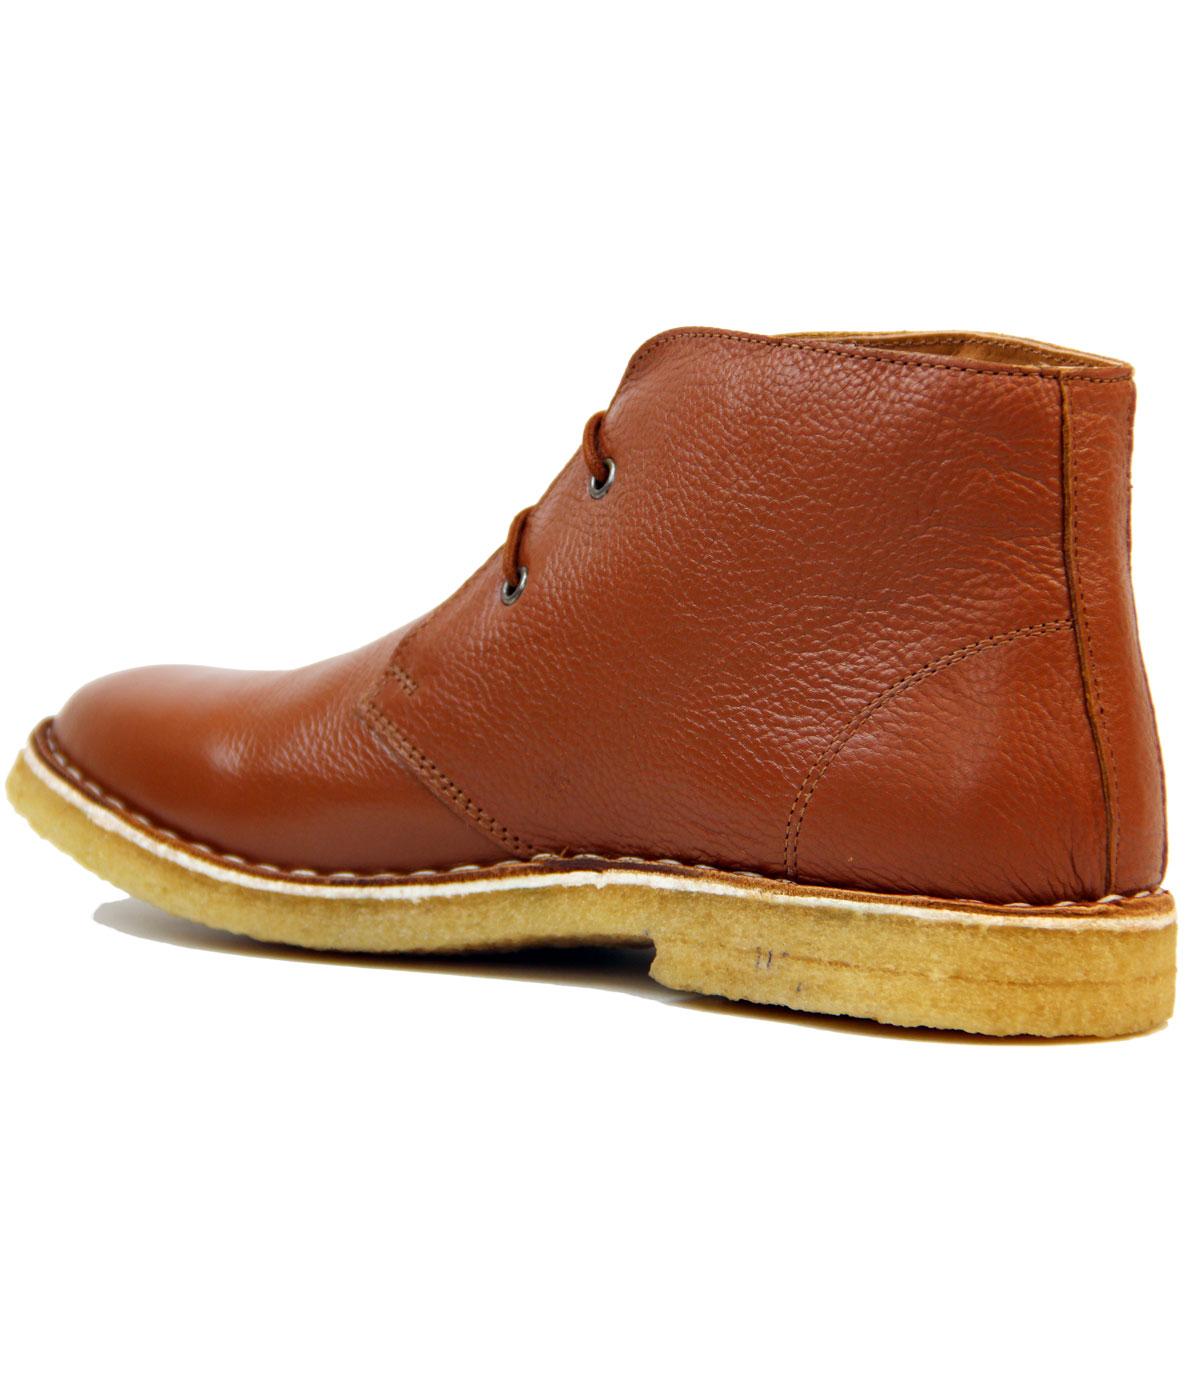 PAOLO VANDINI Netherfield Mod Leather Desert Boots in Tan